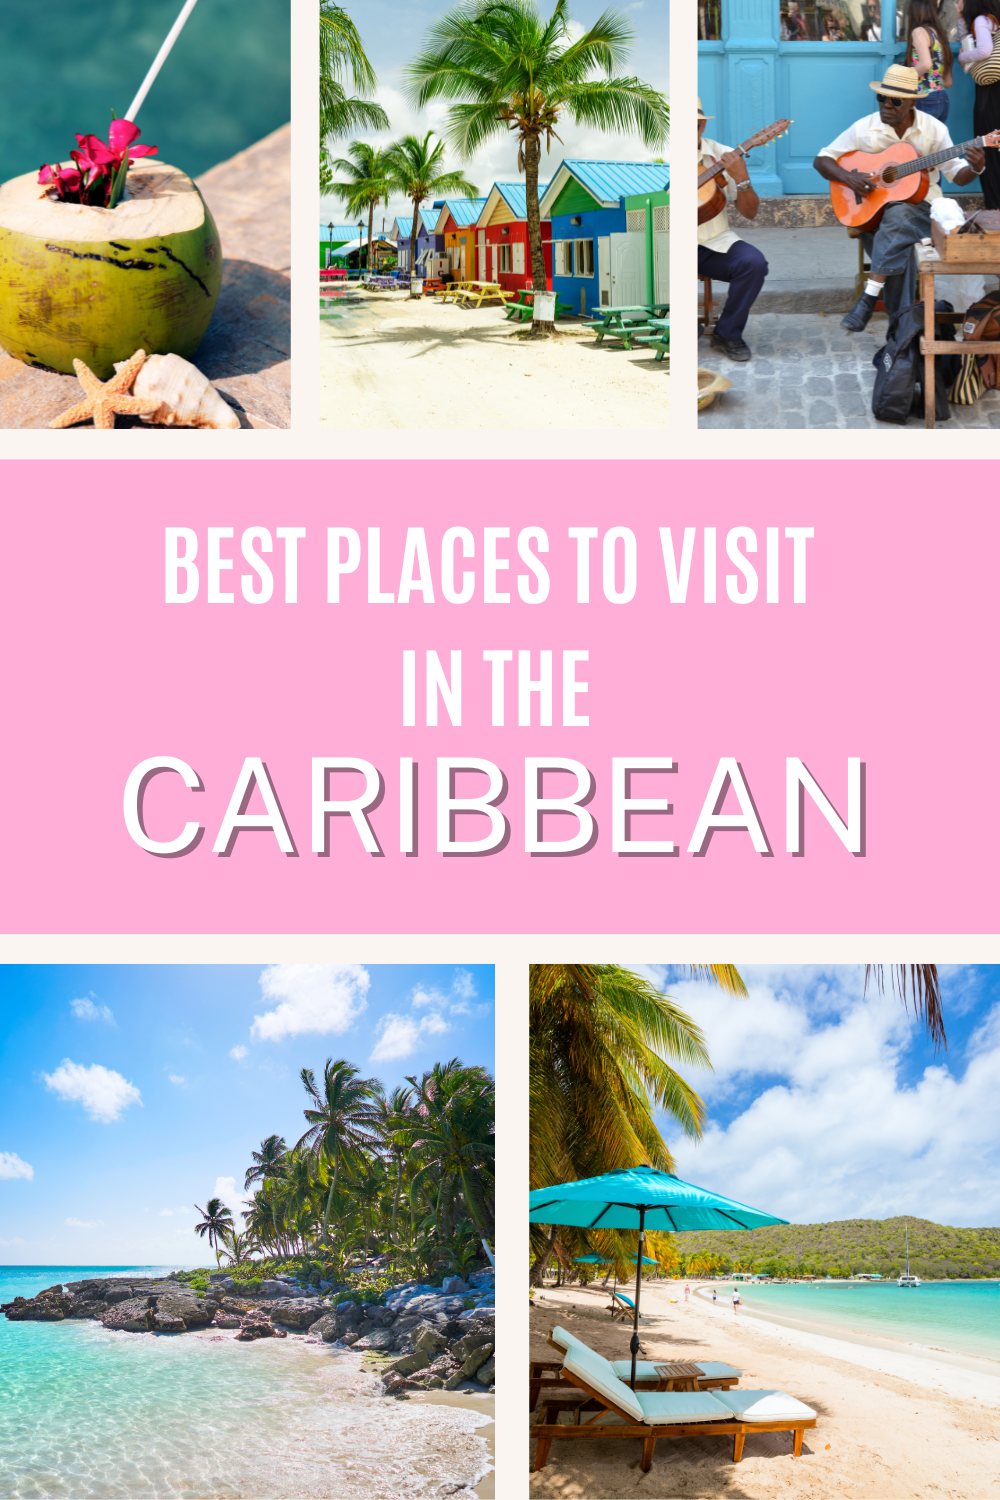 Best Caribbean Island For First Timers: 5 Special Places to Consider